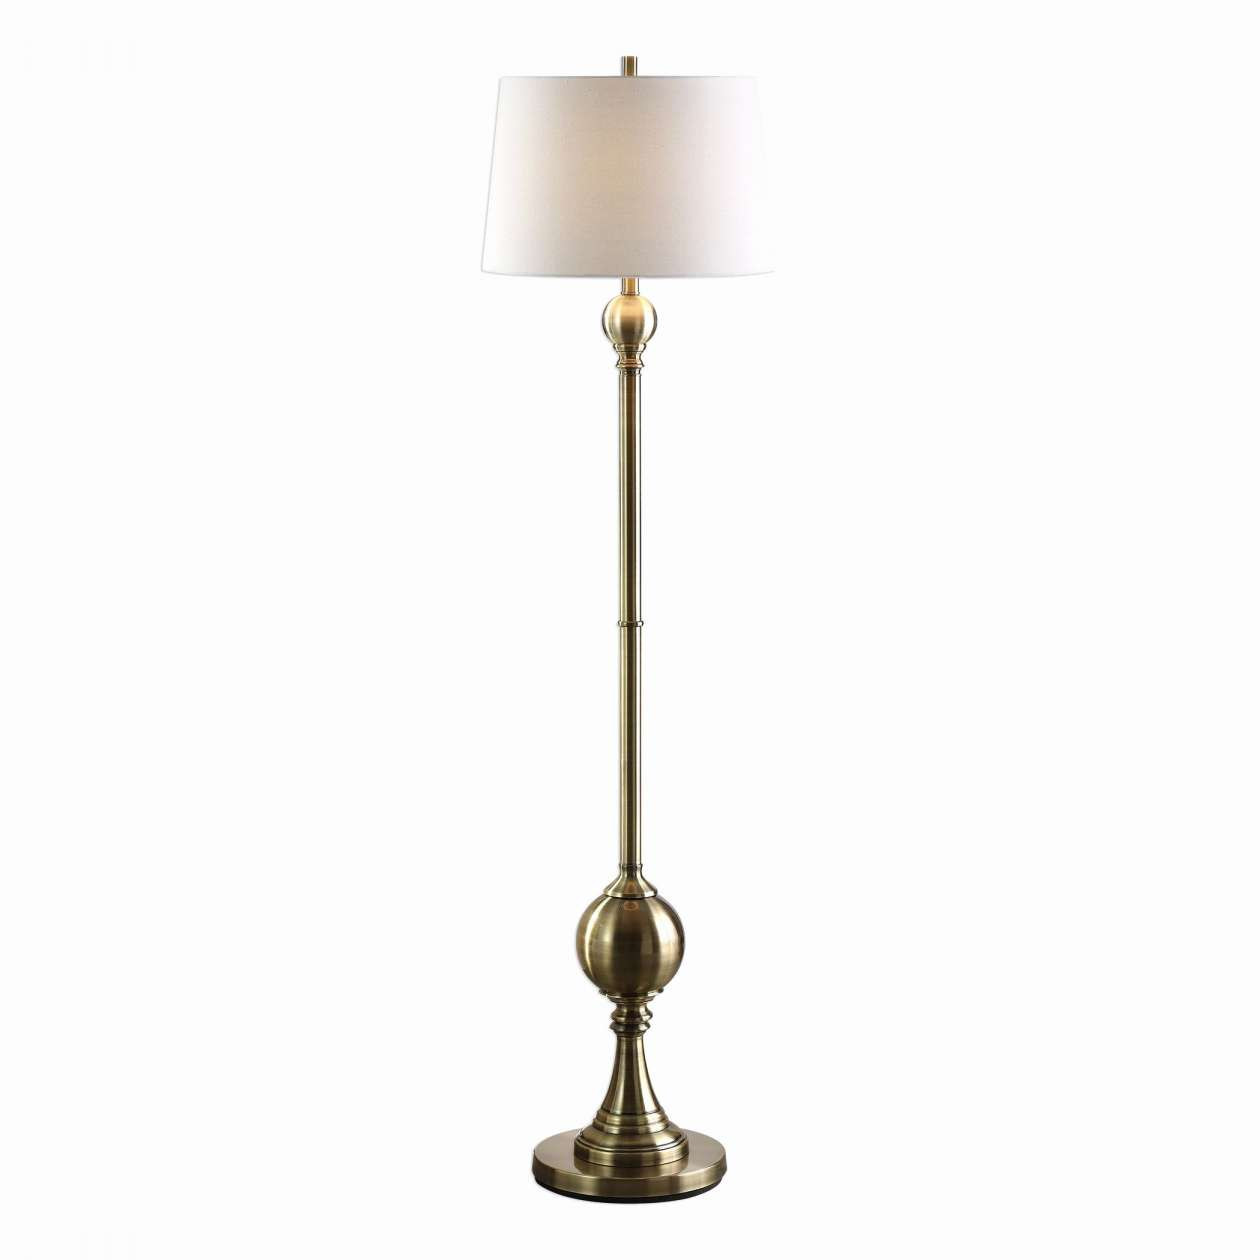 15 Trendy Gold Geometric Vase 2024 free download gold geometric vase of lamp shade black although bedroom black white and gold bedroom fresh pertaining to lamp shade black although bedroom black white and gold bedroom fresh black and gold 